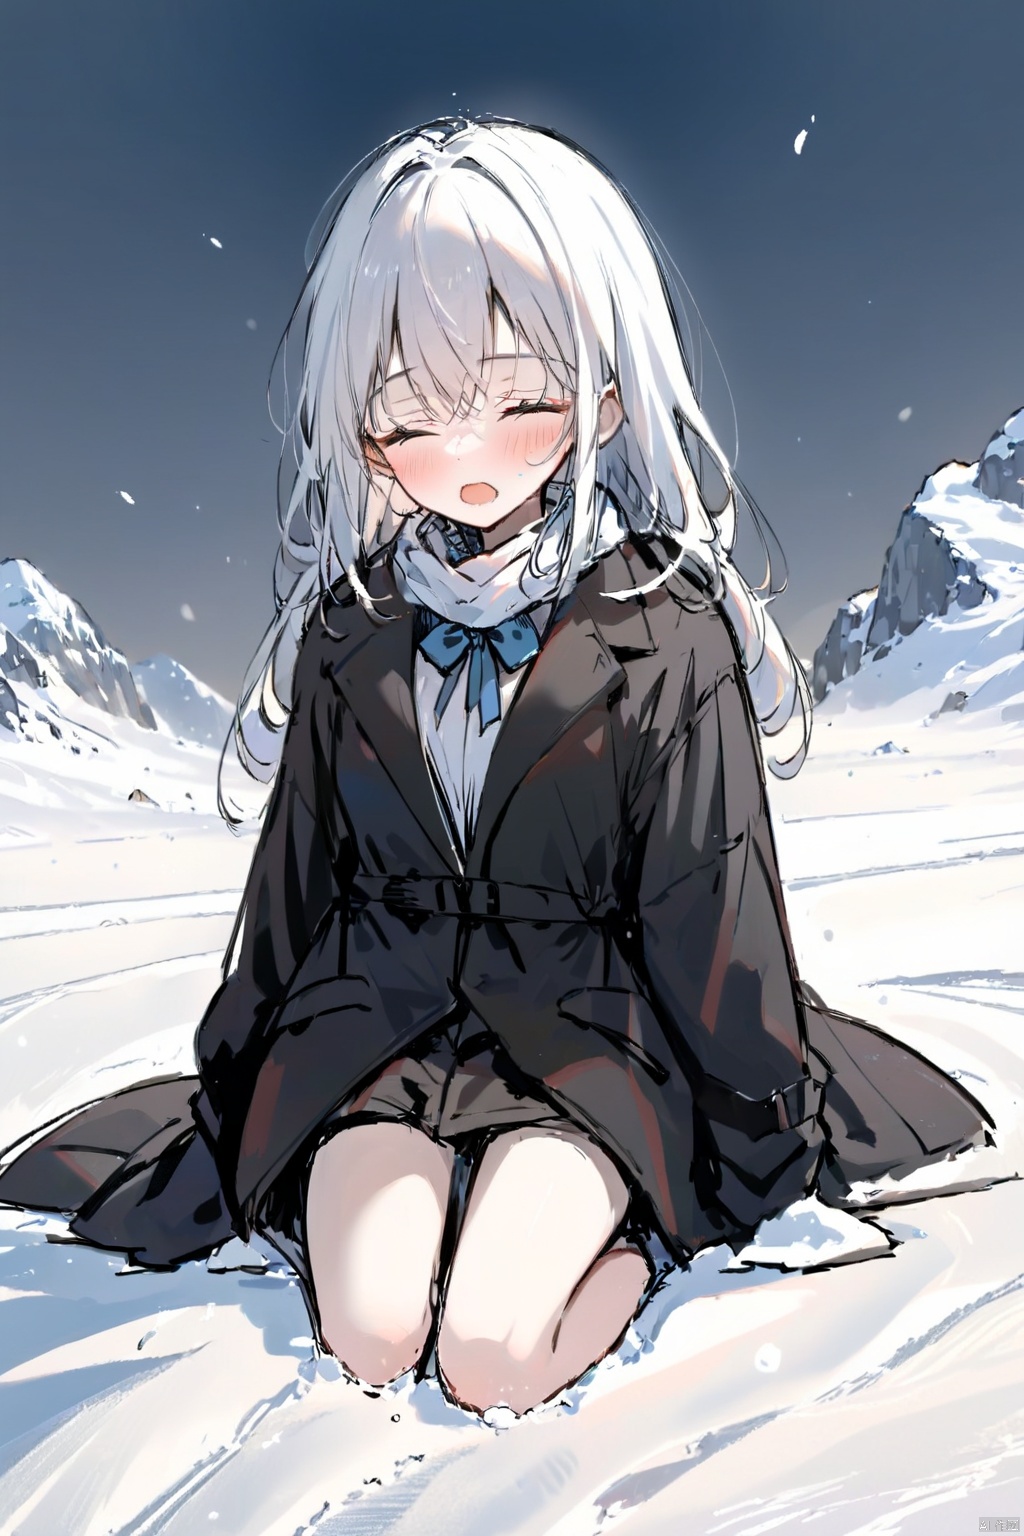  1 girl,full body,detailed face,In the snow all over the sky, a girl walking alone in the snow, wearing red thin trench coat, with a white scarf, Bare legs, bare feet, Holding her body tightly, her head bowed, her eyes closed, her mouth pressed together, and she was about to cry, Long white hair blows in the wind, The detailed and beautiful face was depressed, step by step, behind is a series of footprints, the snow is very big, the biting wind blowing her scarf, the distance is unbroken snow mountains, in this evening, helpless forward. , greyscale,sketch, monochrome, greyscale,crying, concept art, ((wlop))